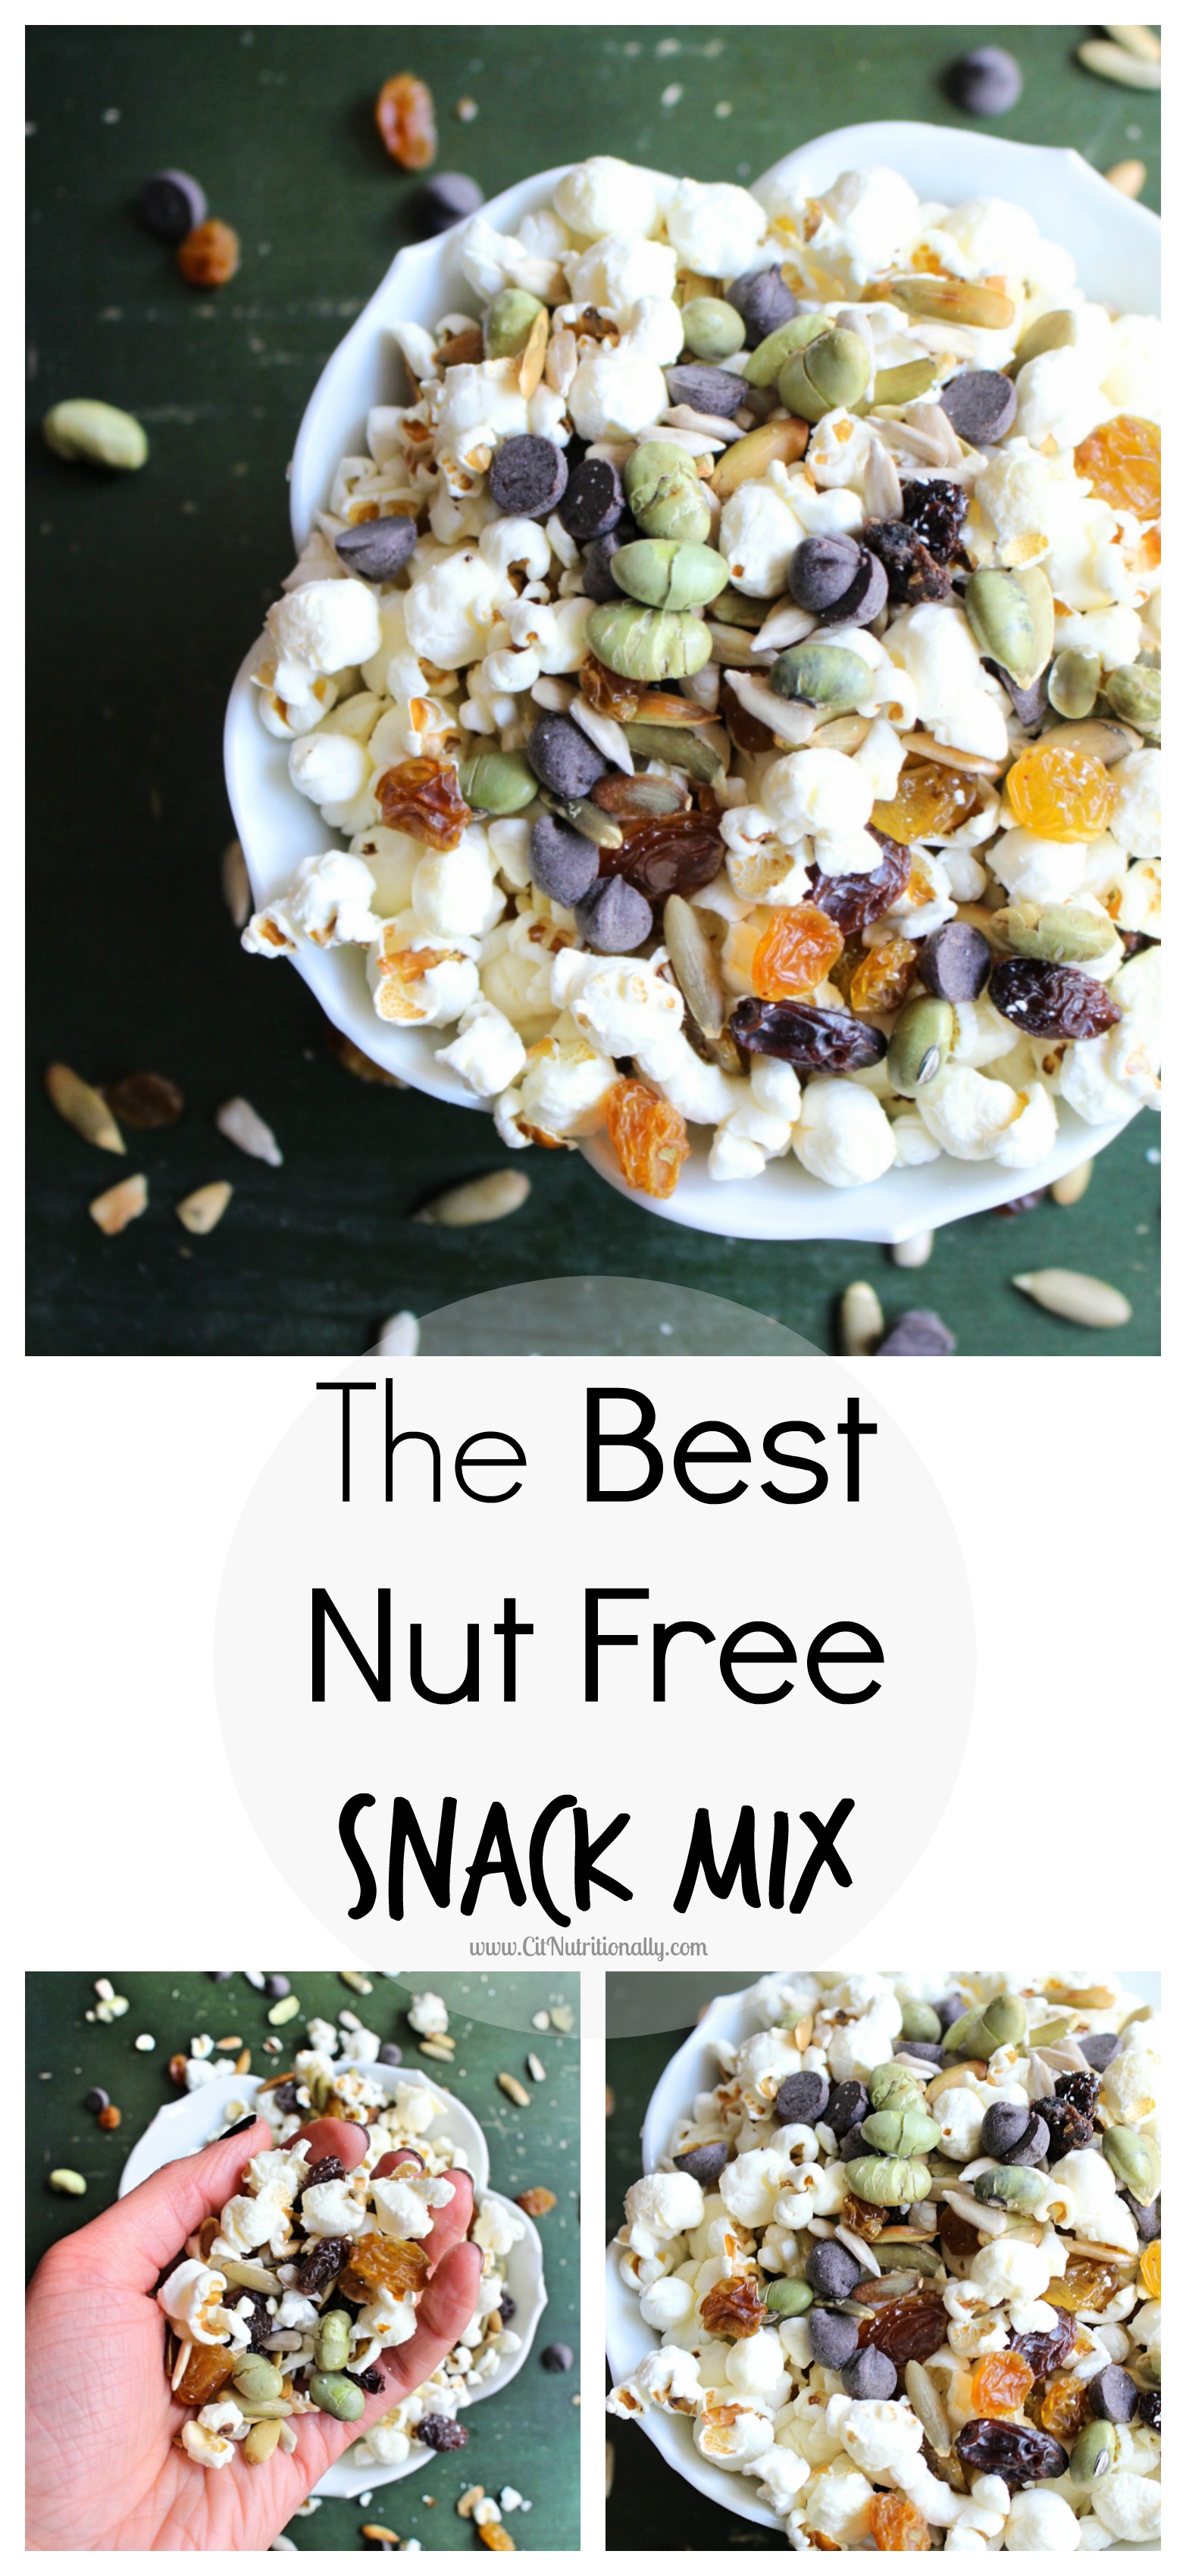 Satisfy your healthy snack time cravings with my Nut Free Snack Mix full of salty and sweet flavors with both a crunch and chew! Customizable to be free of the top 8 food allergens! Vegan, Gluten free. The Best Nut Free Snack Mix | C it Nutritionally